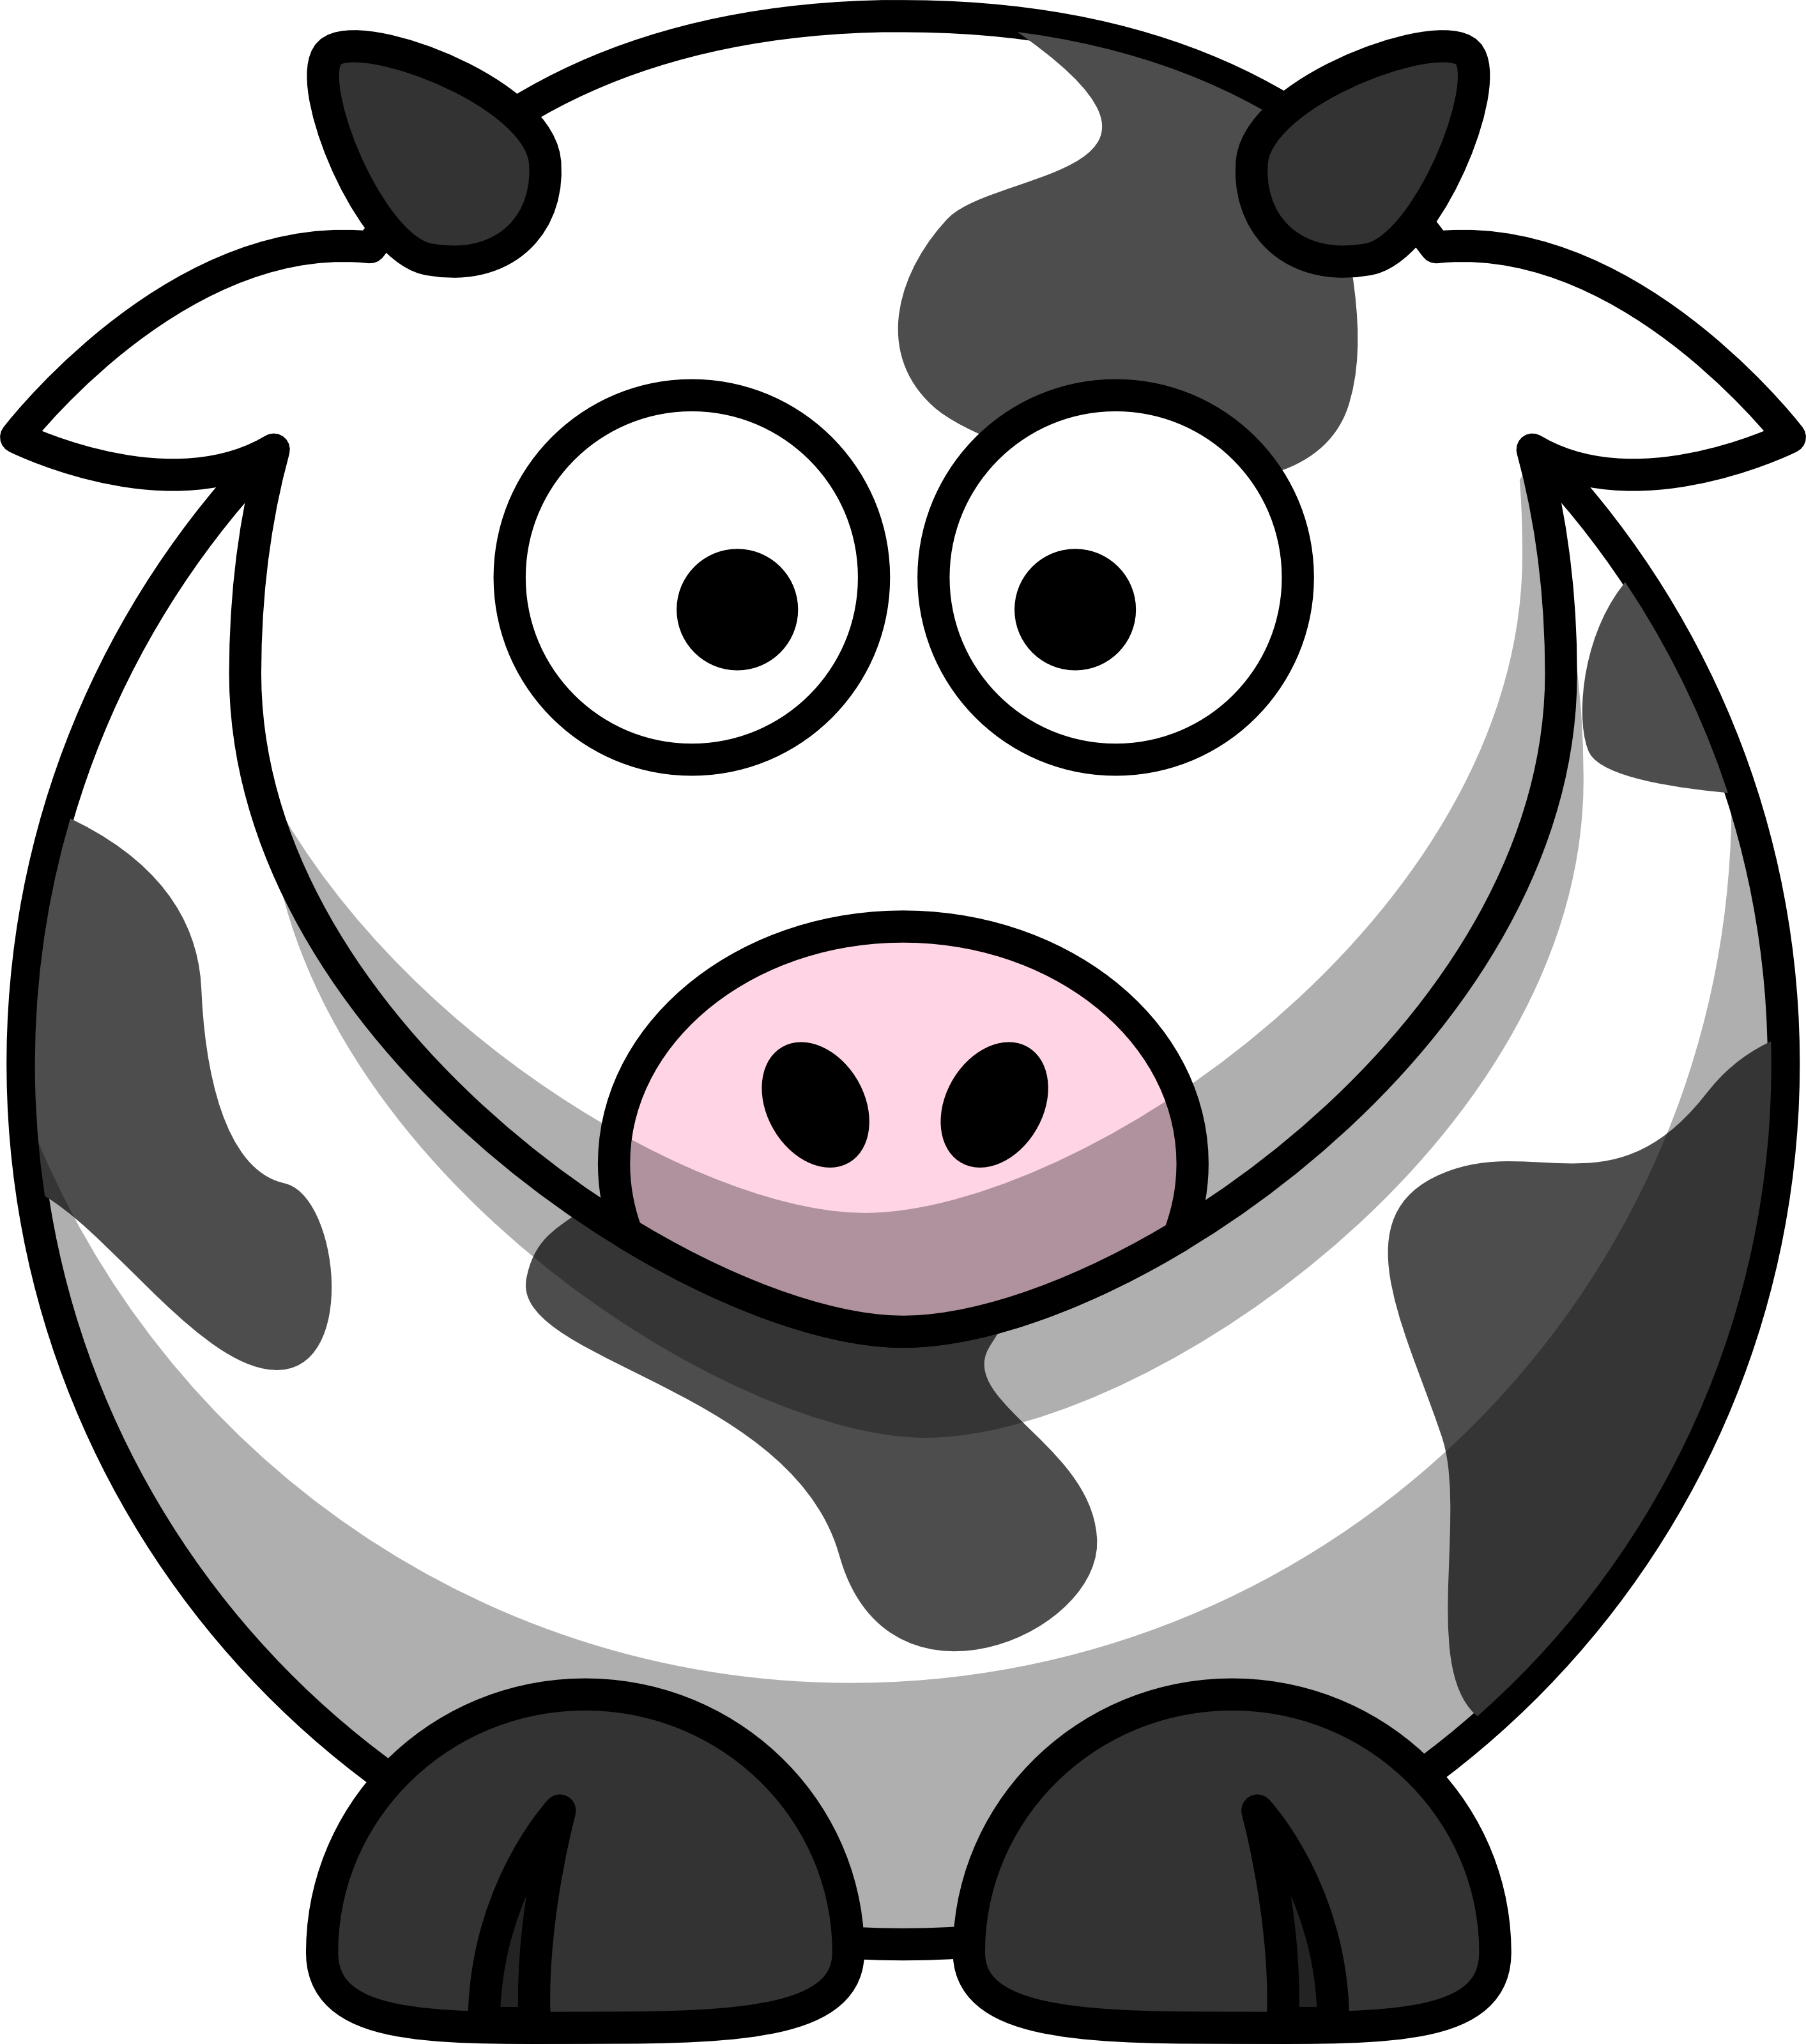 cow clipart black and white - photo #35